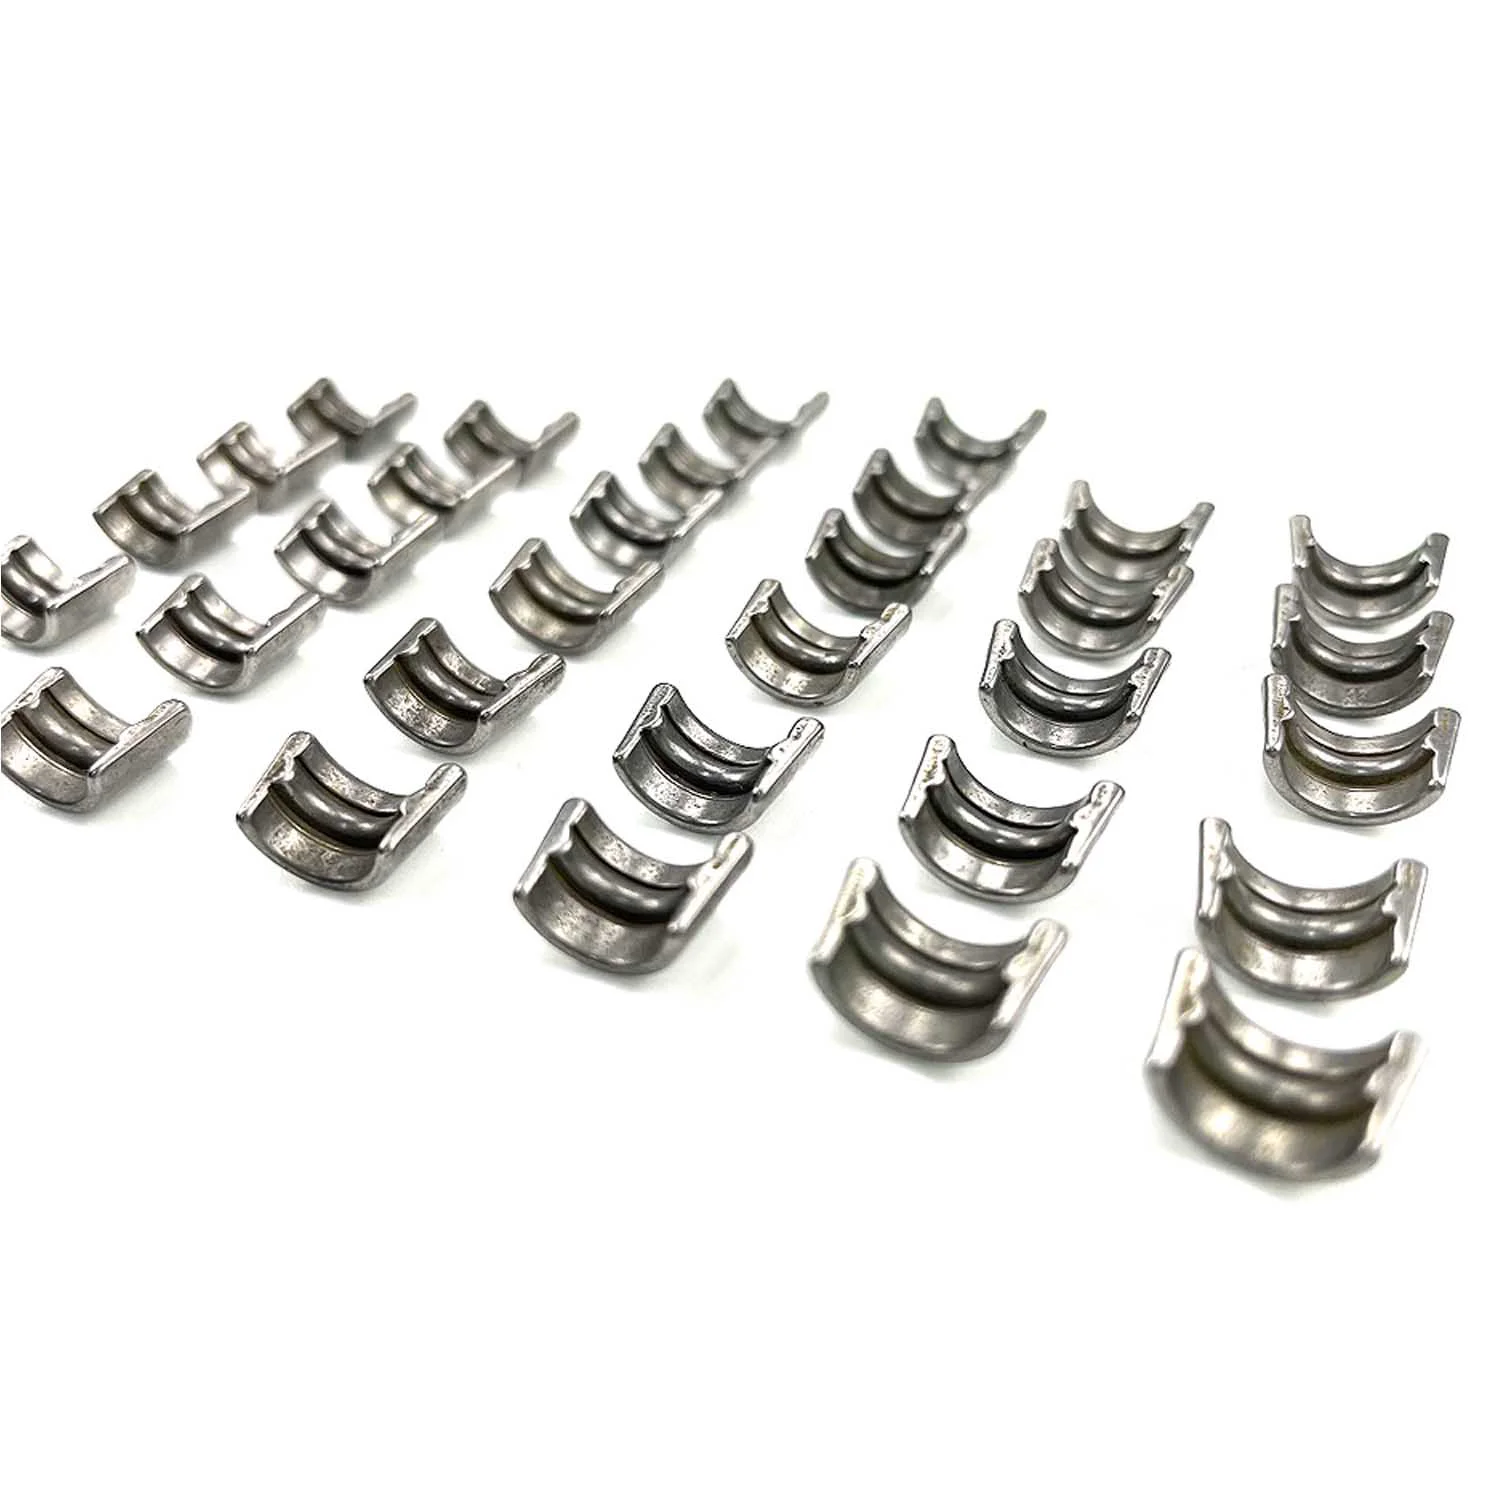 New Z28 Style Valve Spring Retainer Lock Set for Chevy 400 350 327 307 305 283 images - 6